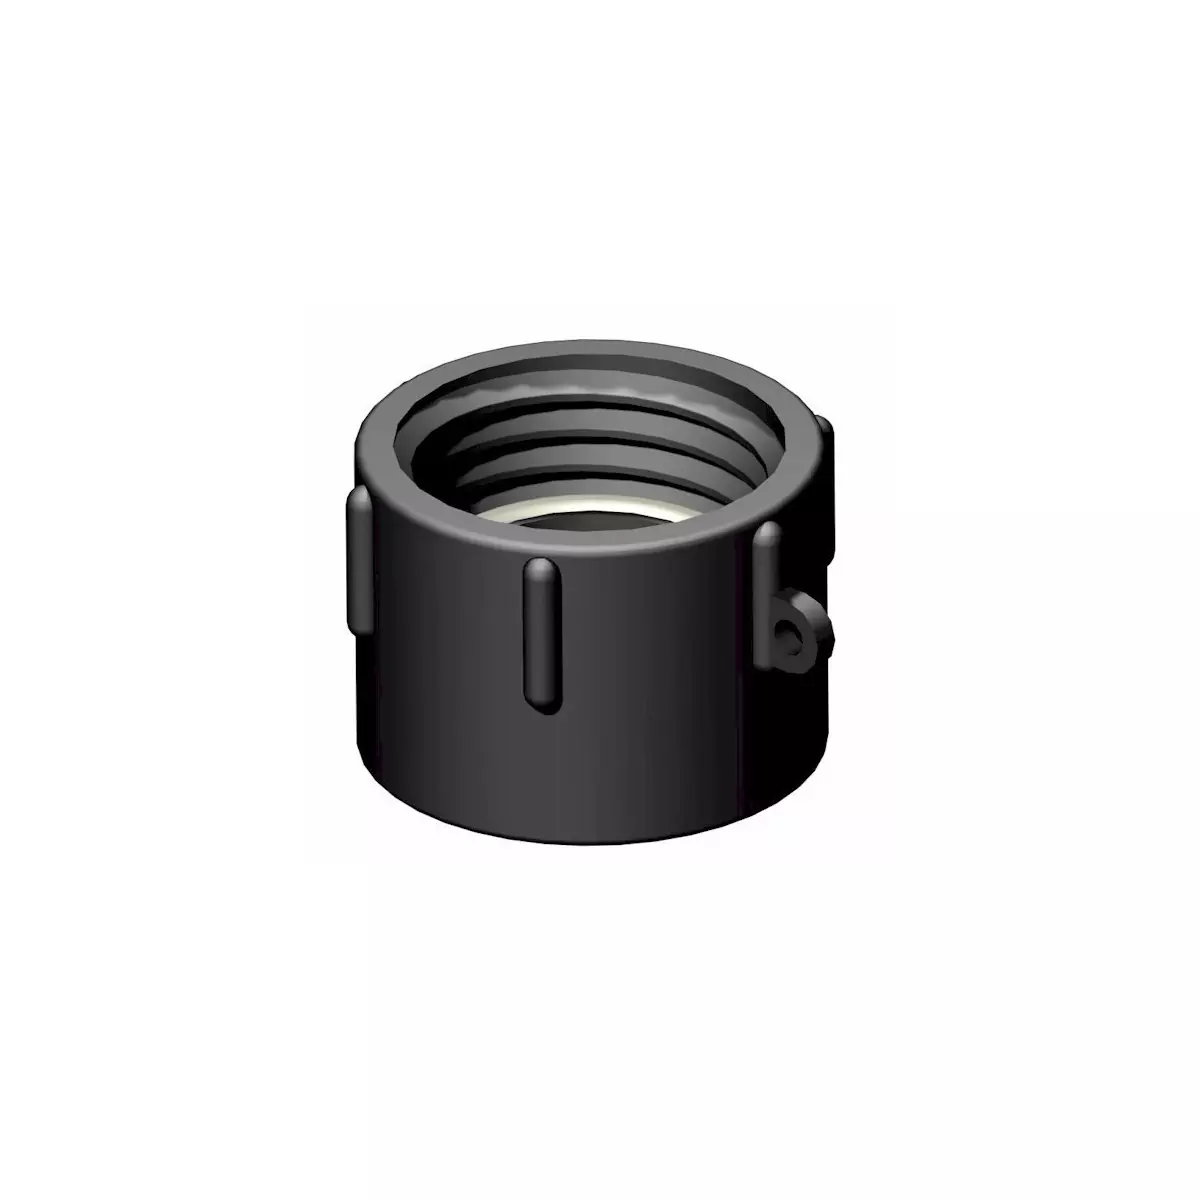 Product sheet Female 2 "S60x6 / female 2" non-gas fitting